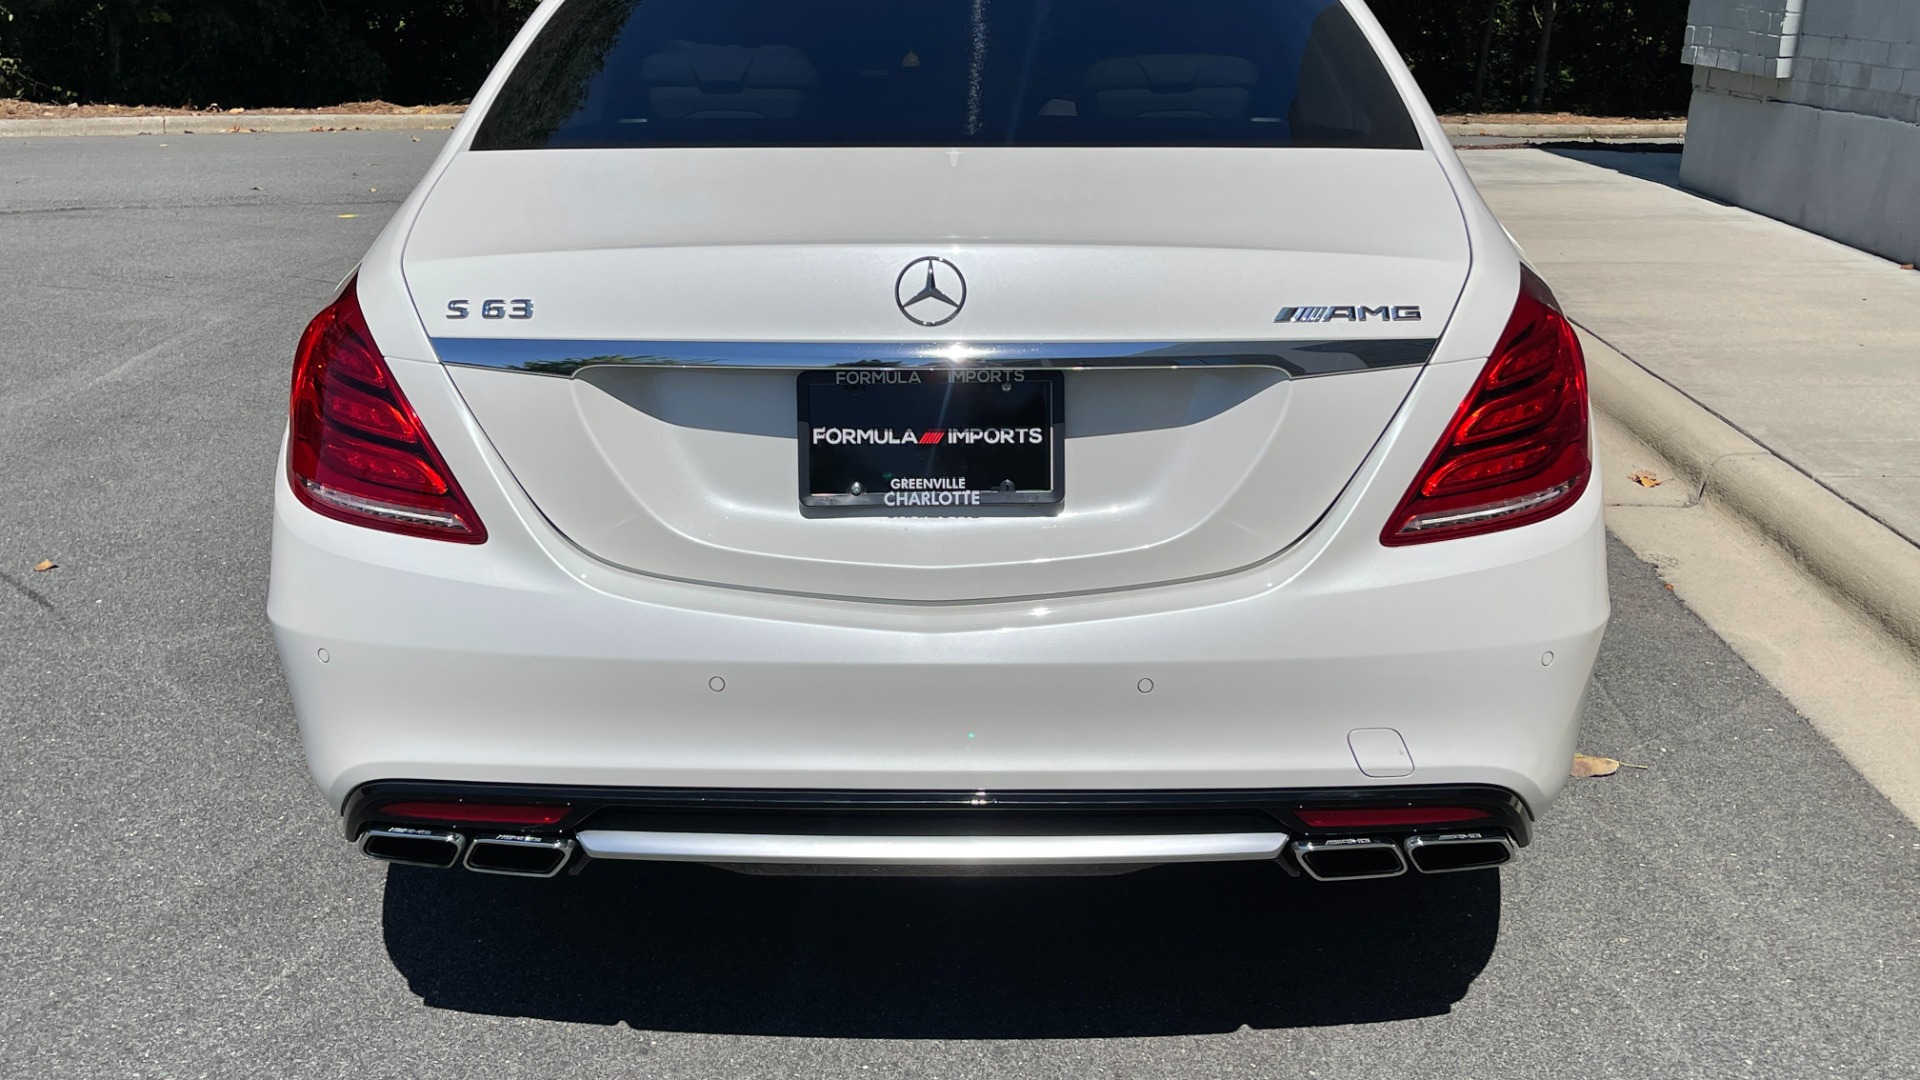 Used 2016 Mercedes-Benz S-Class AMG S63 / EXCLUSIVE TRIM / BURMESTER 3D HIGH END SOUND / DRIVER ASSISTANCE  for sale Sold at Formula Imports in Charlotte NC 28227 8